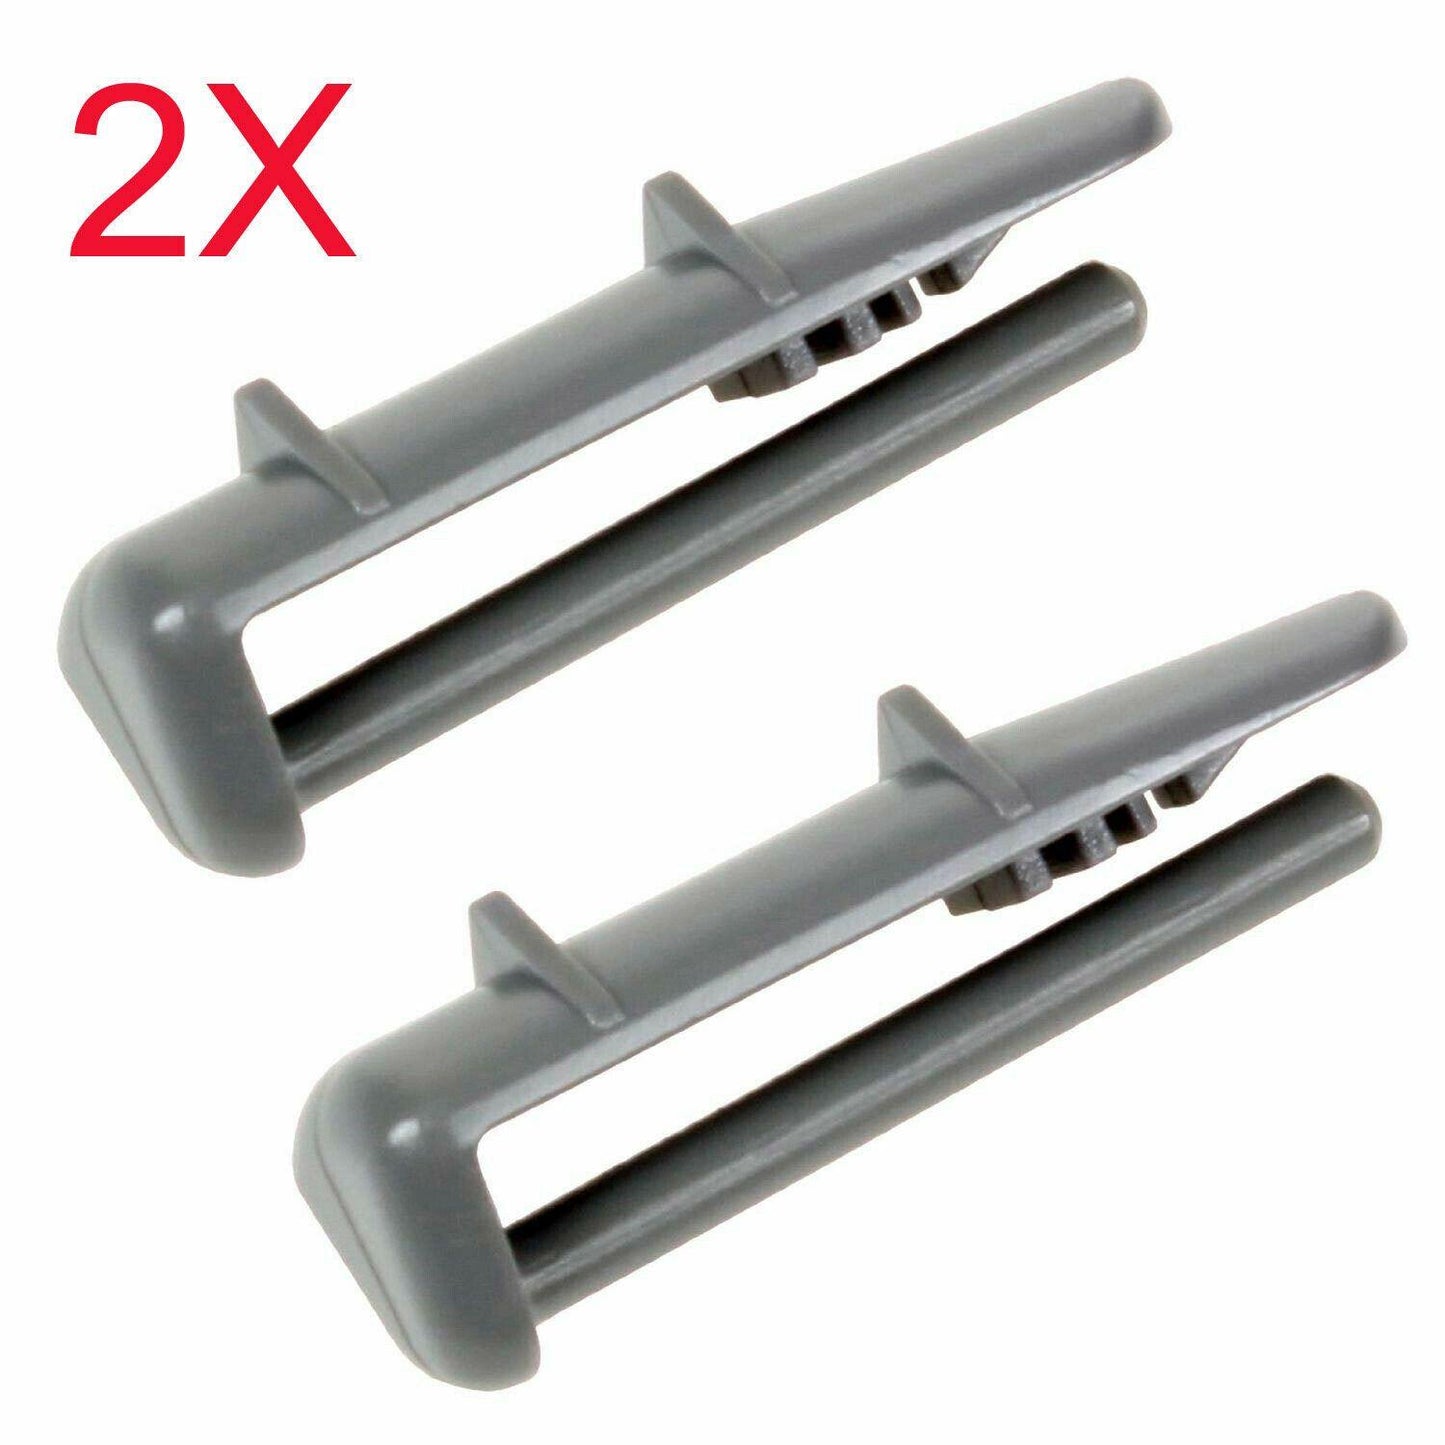 4X Dishwasher Rail Cap Rear Stop End Clip For BLANCO BFD45X BFD4X Sparesbarn